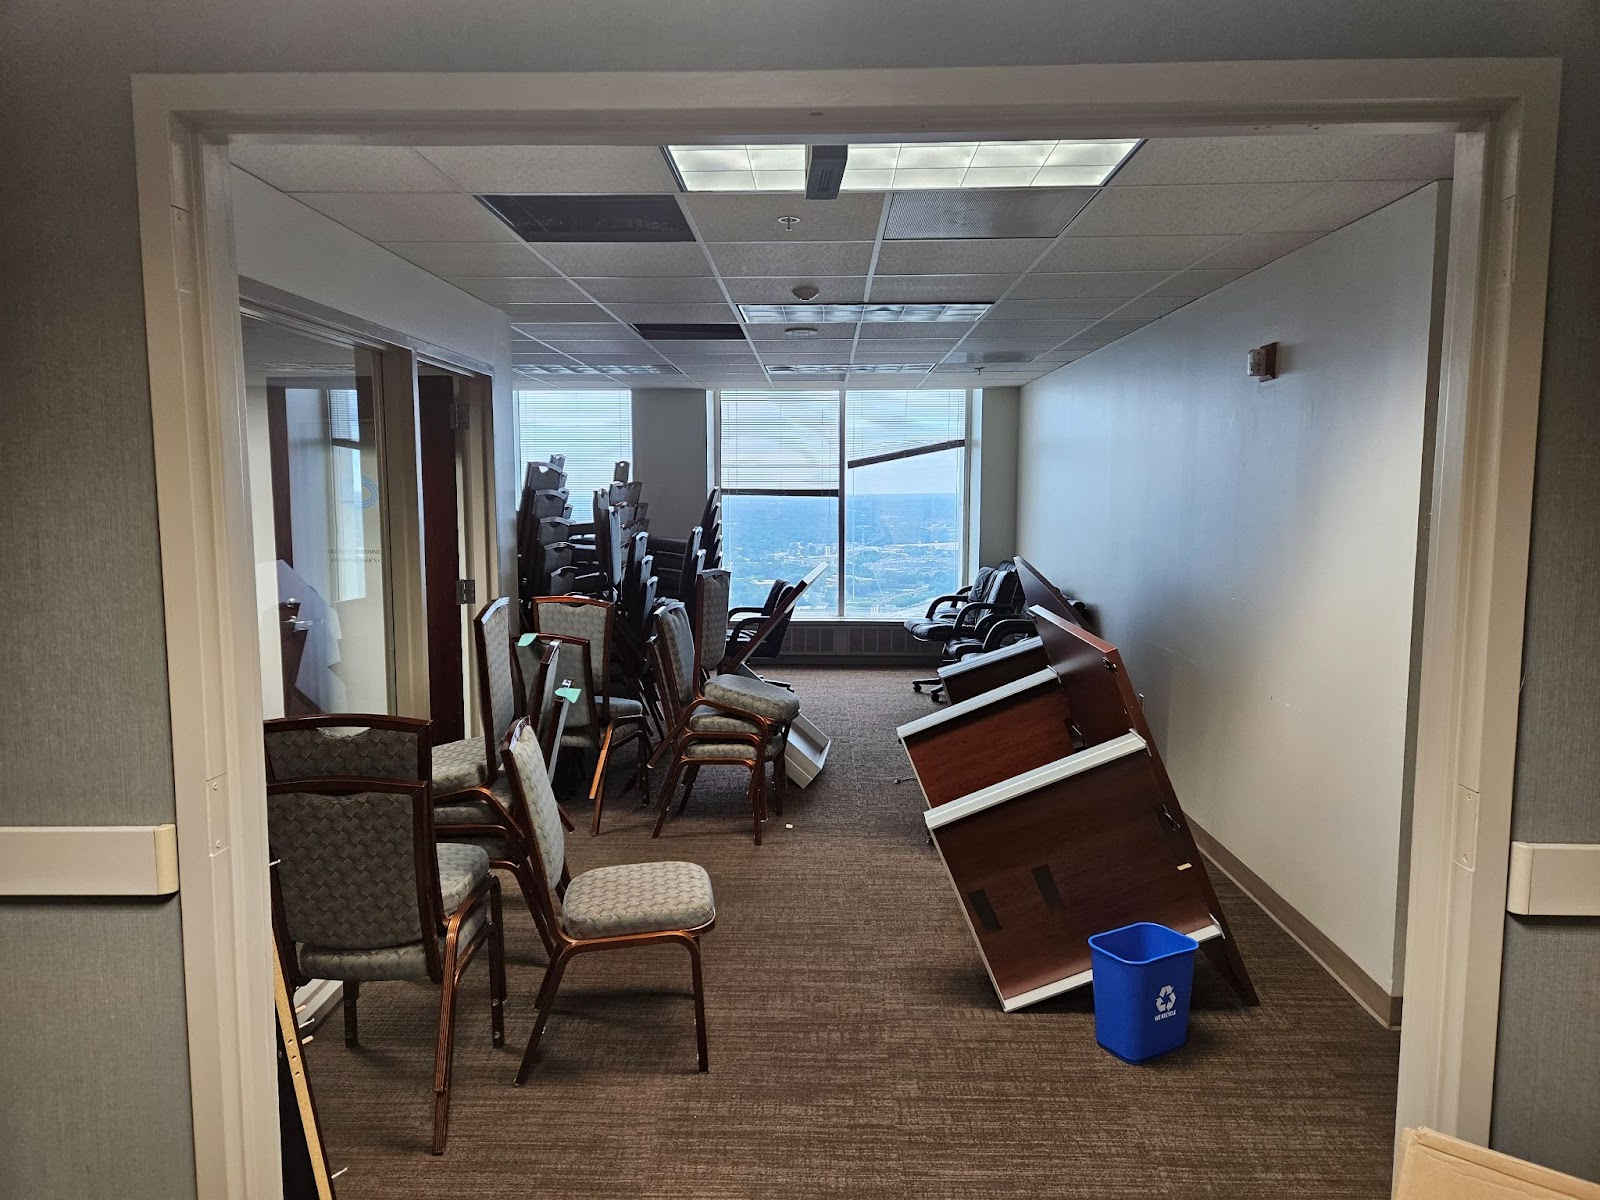 A photo of an office with stacks of unused chairs and other furniture. 